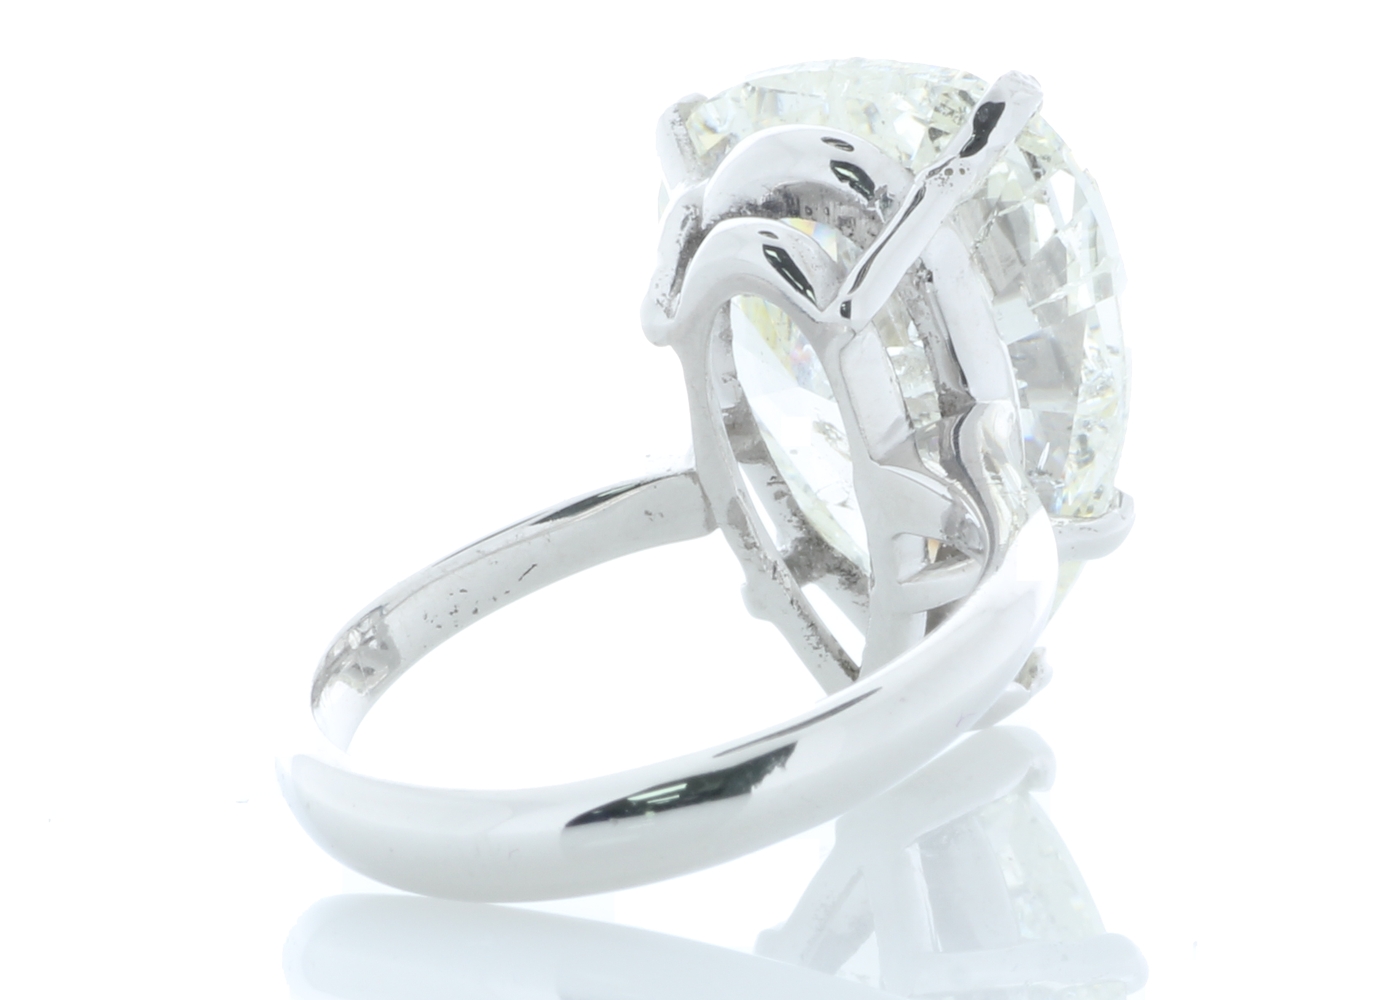 18ct White Gold Pear Shaped Diamond Ring 10.06 Carats - Image 5 of 6